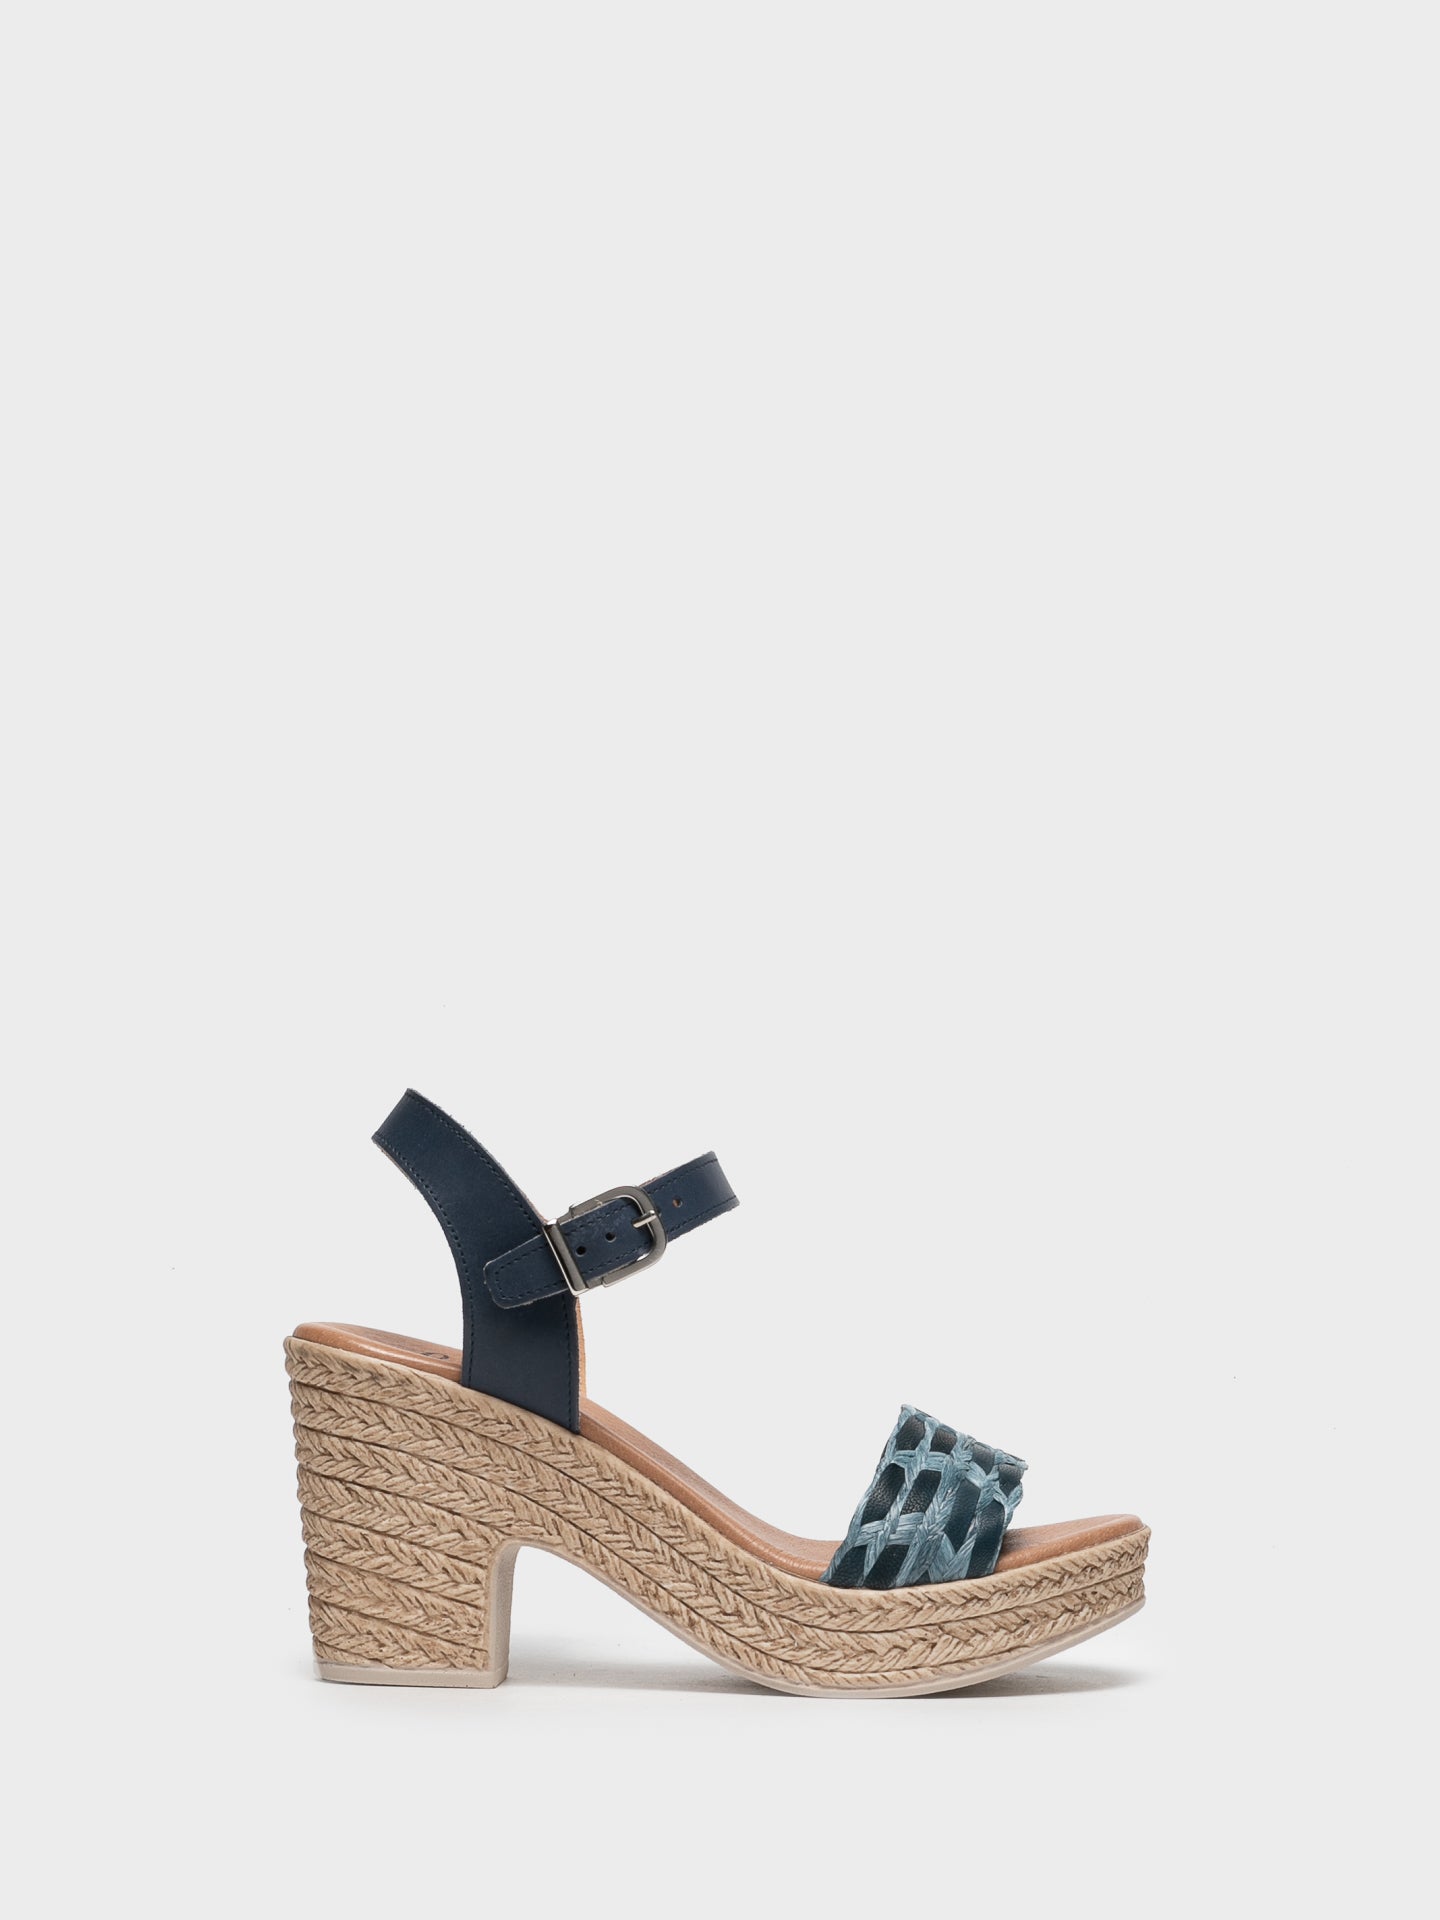 Clay's Blue Ankle Strap Sandals